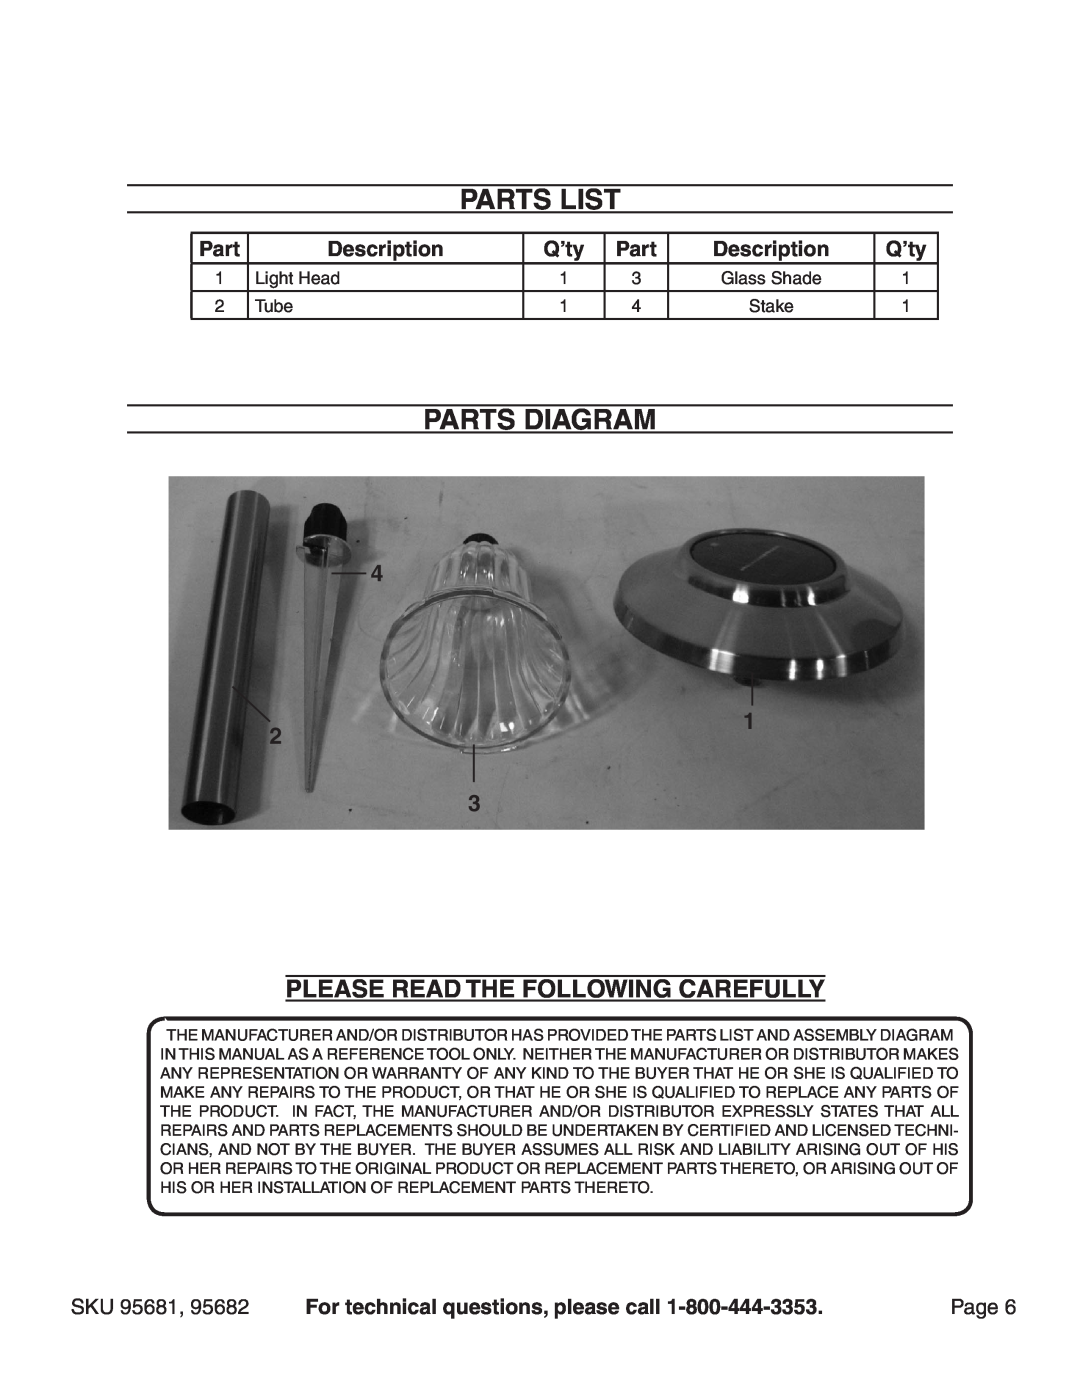 Harbor Freight Tools 95682, 95681 manual Parts List, parts DIAGRAM, Please Read The Following Carefully, Page 